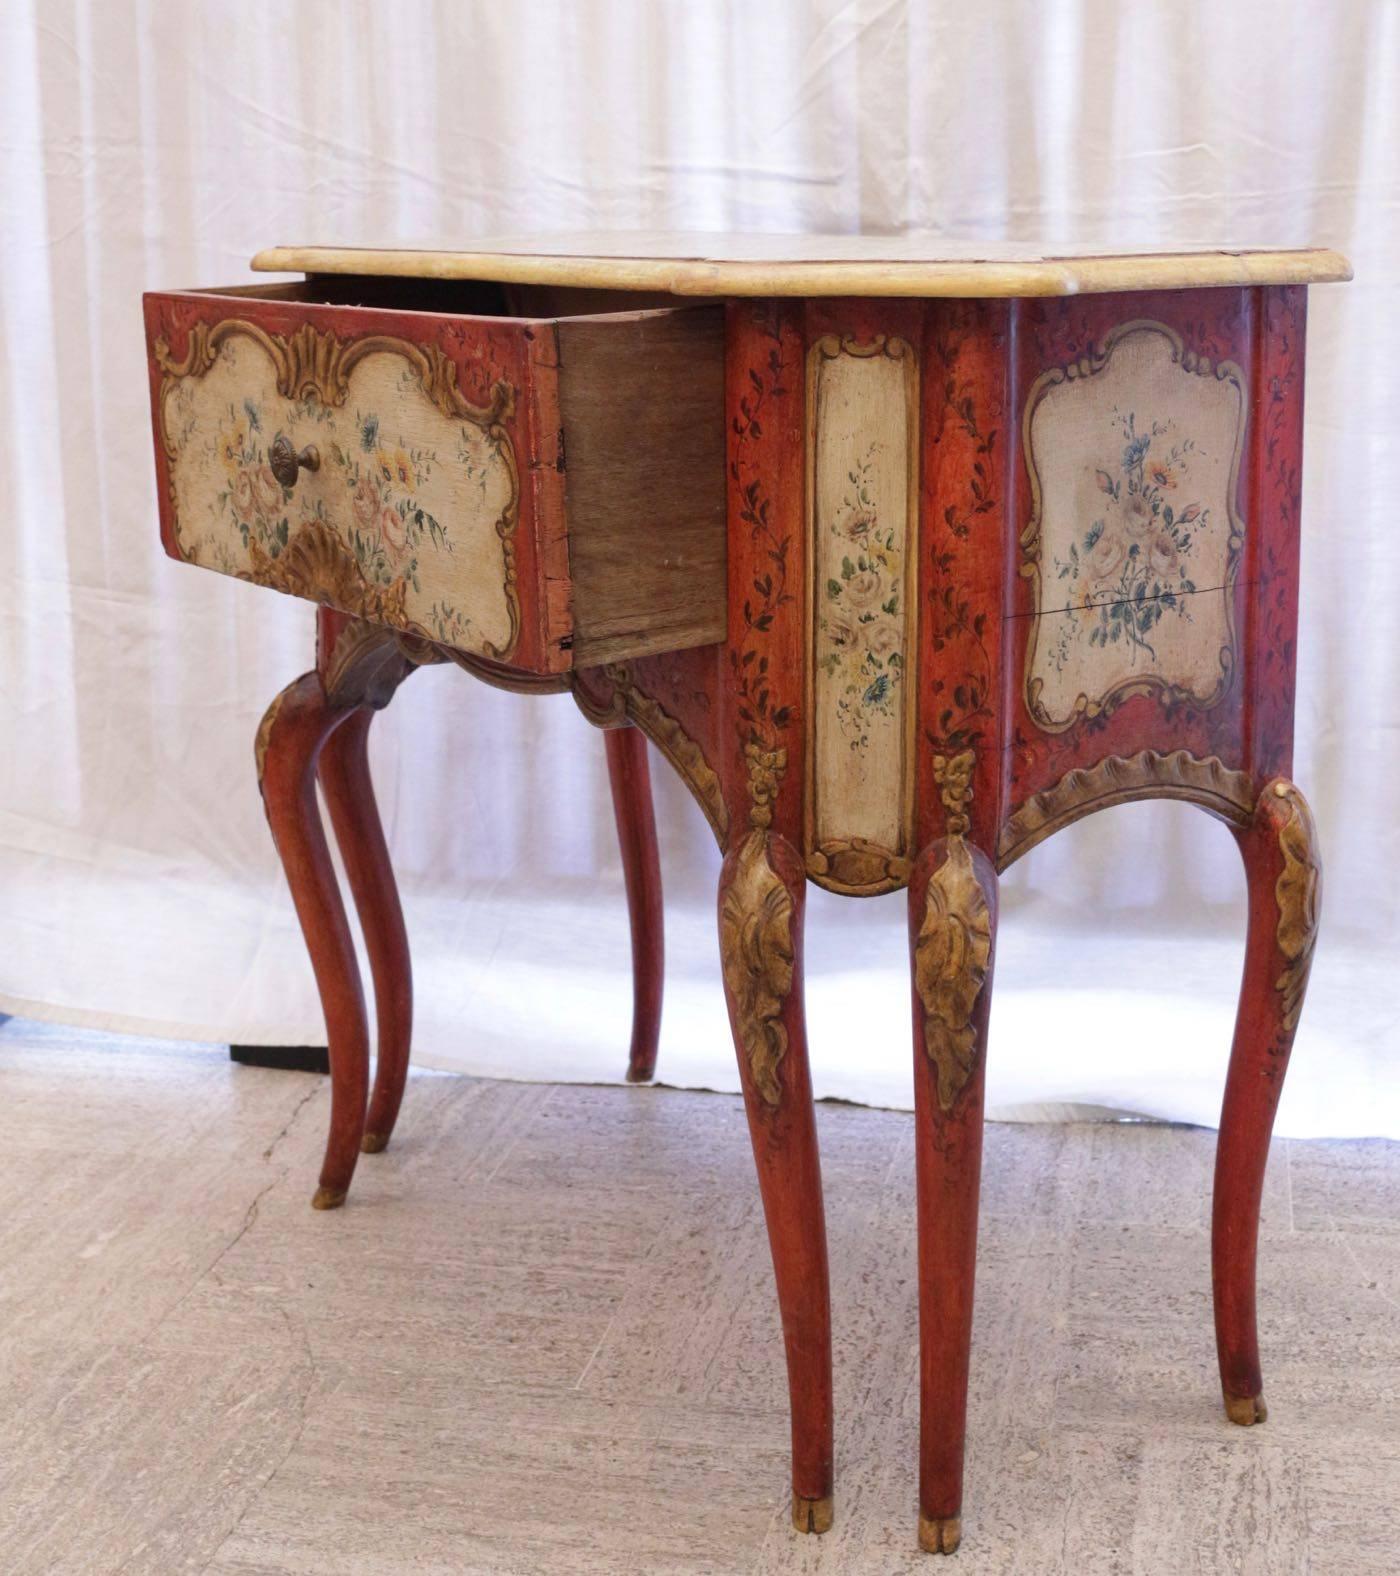 Decorative Pair of Polychrome Italian Commodes, Bedside Tables 1